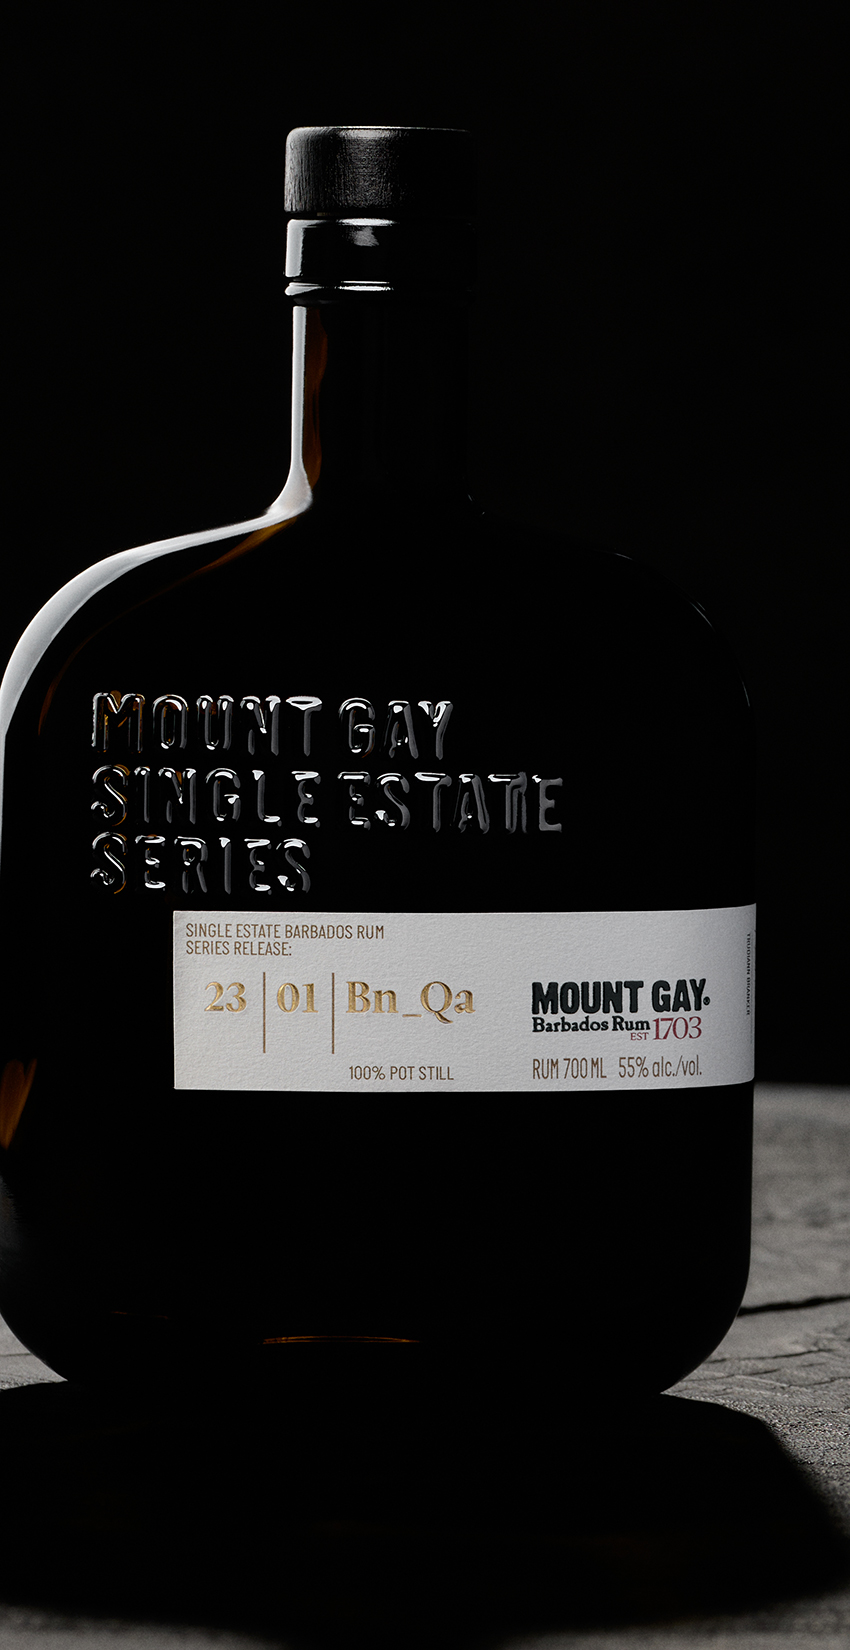 First Edition of the Single Estate Series From Mount Gay Rum